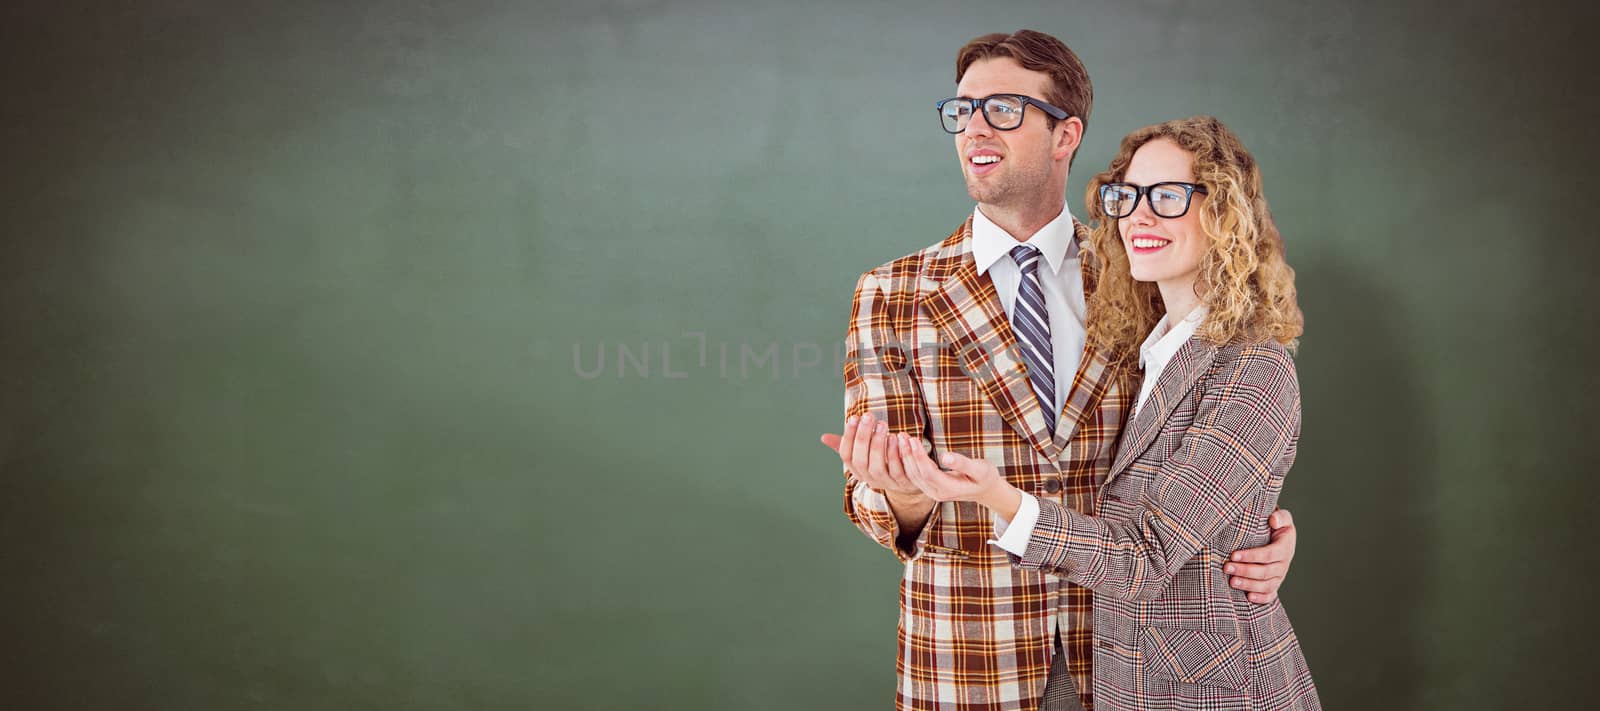 Geeky young hipster smiling at camera against green chalkboard